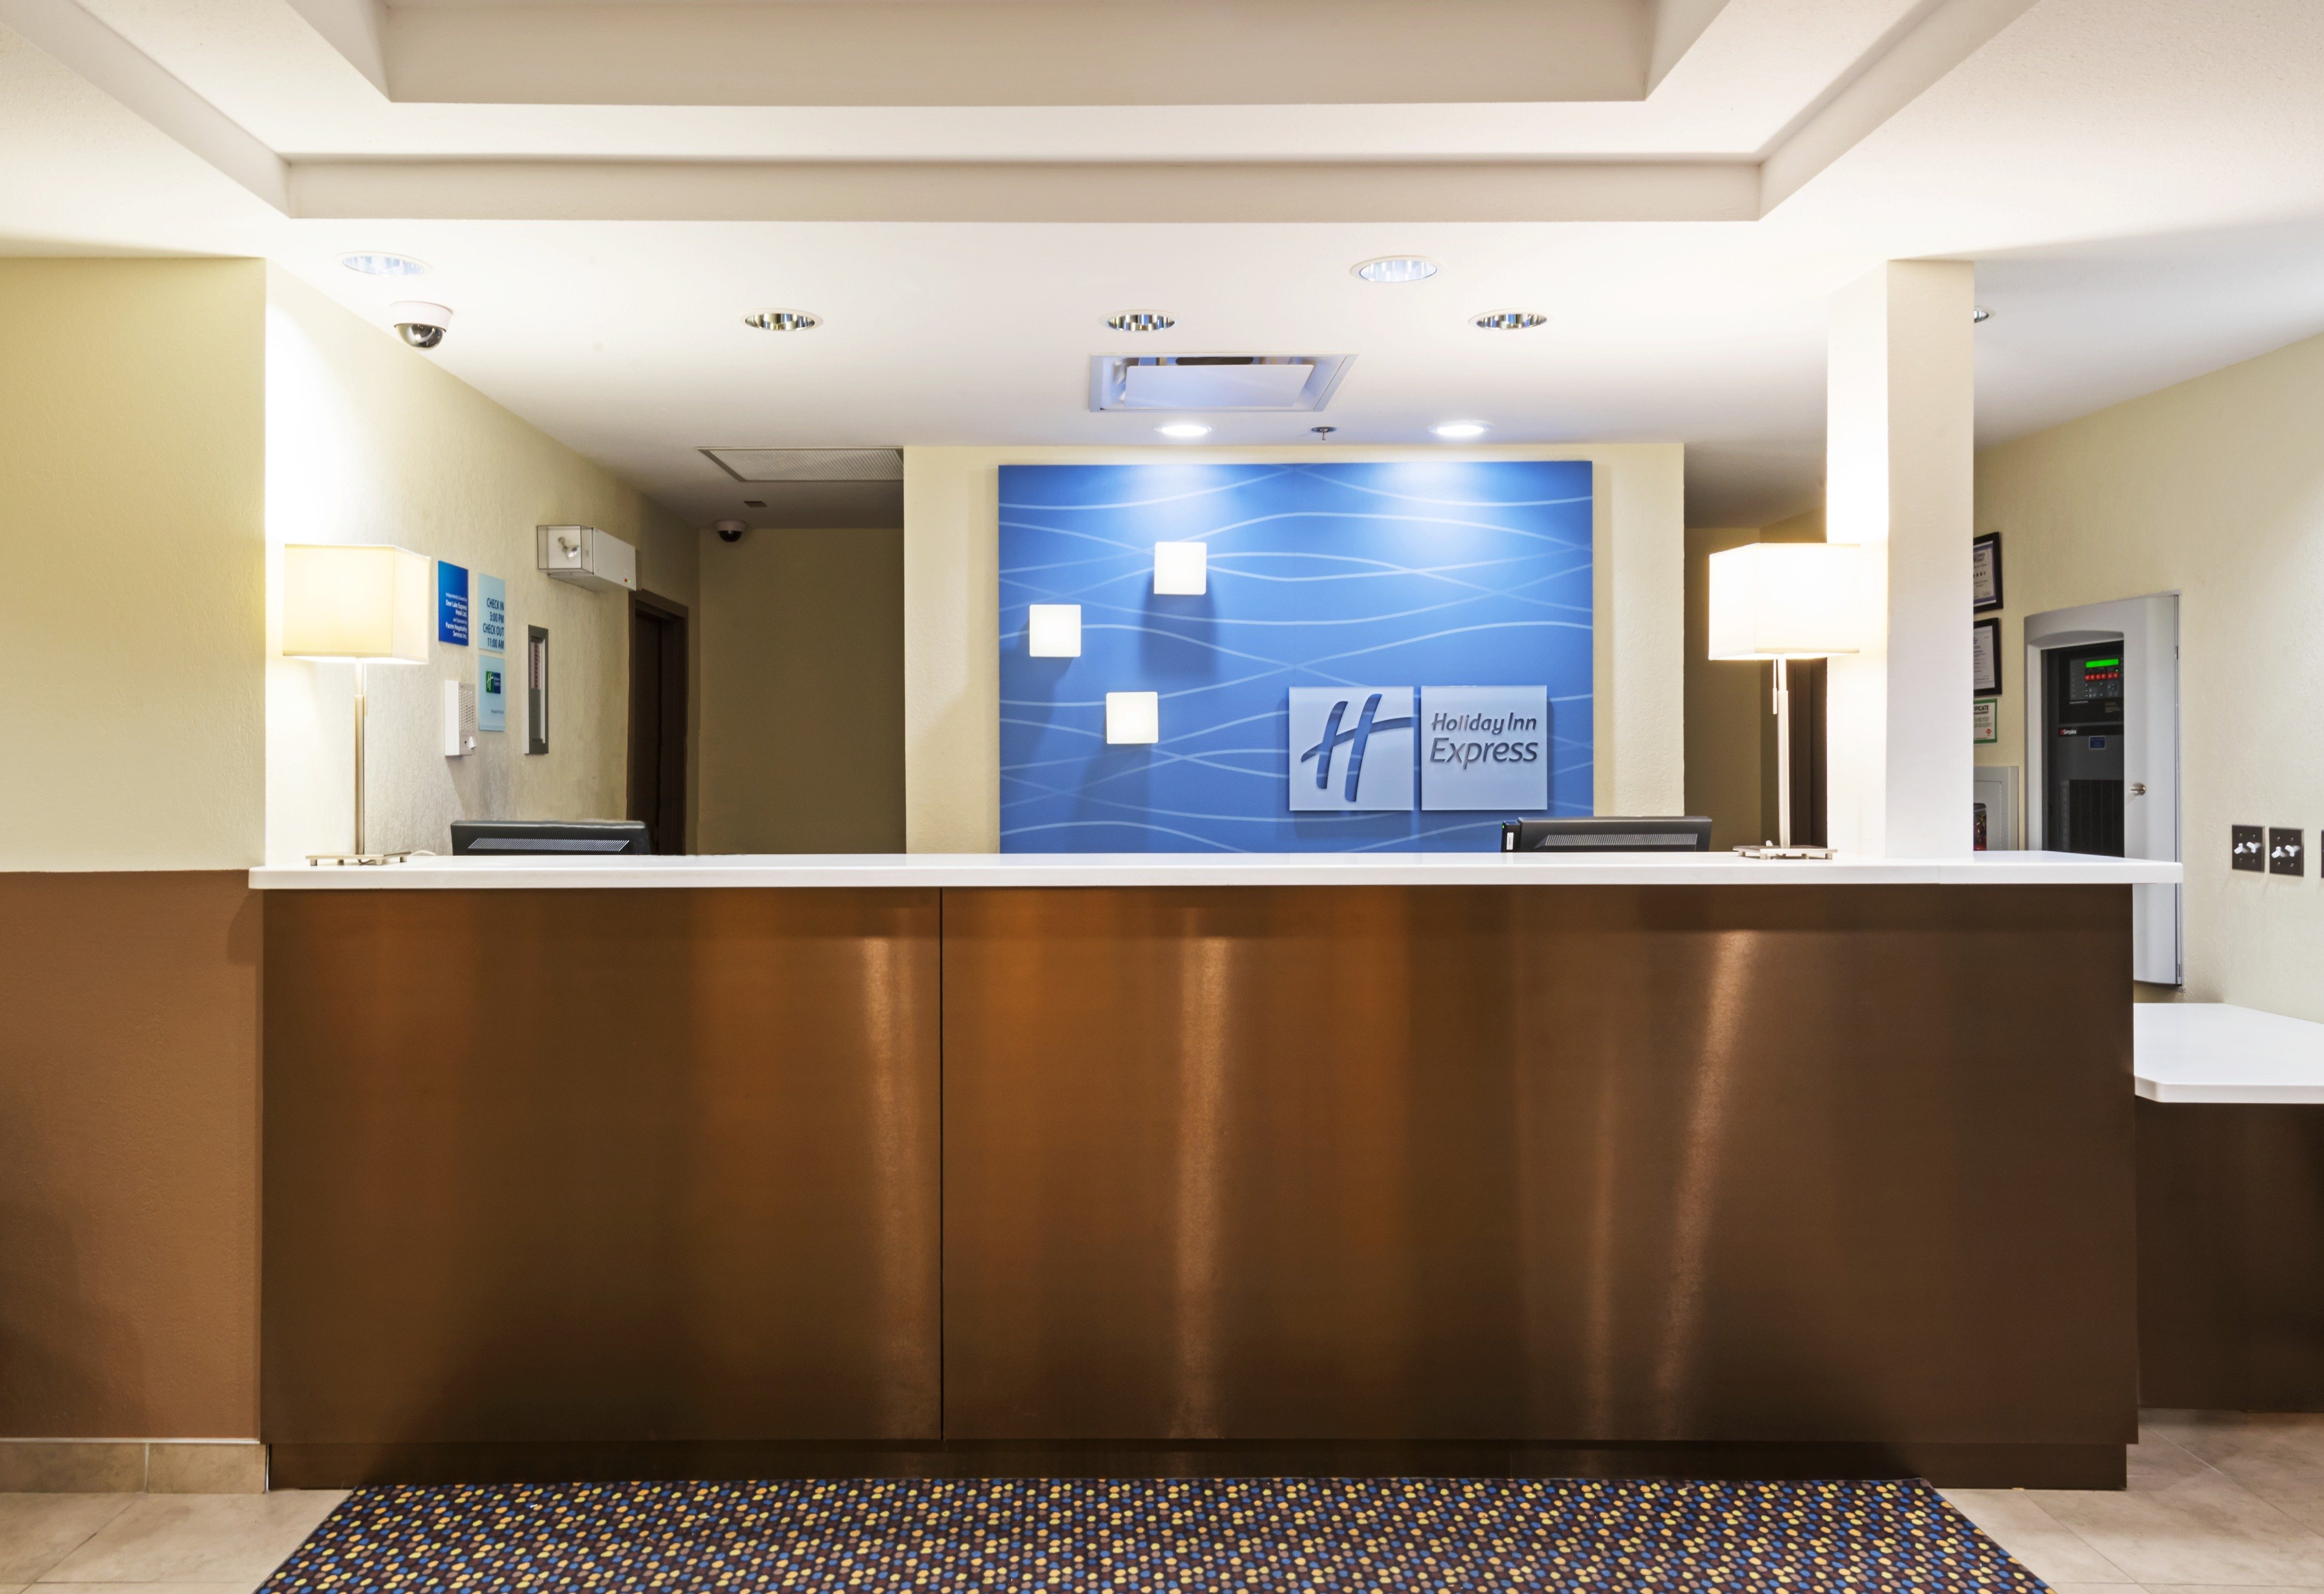 Take advantage of the hotel's express check in/out service.